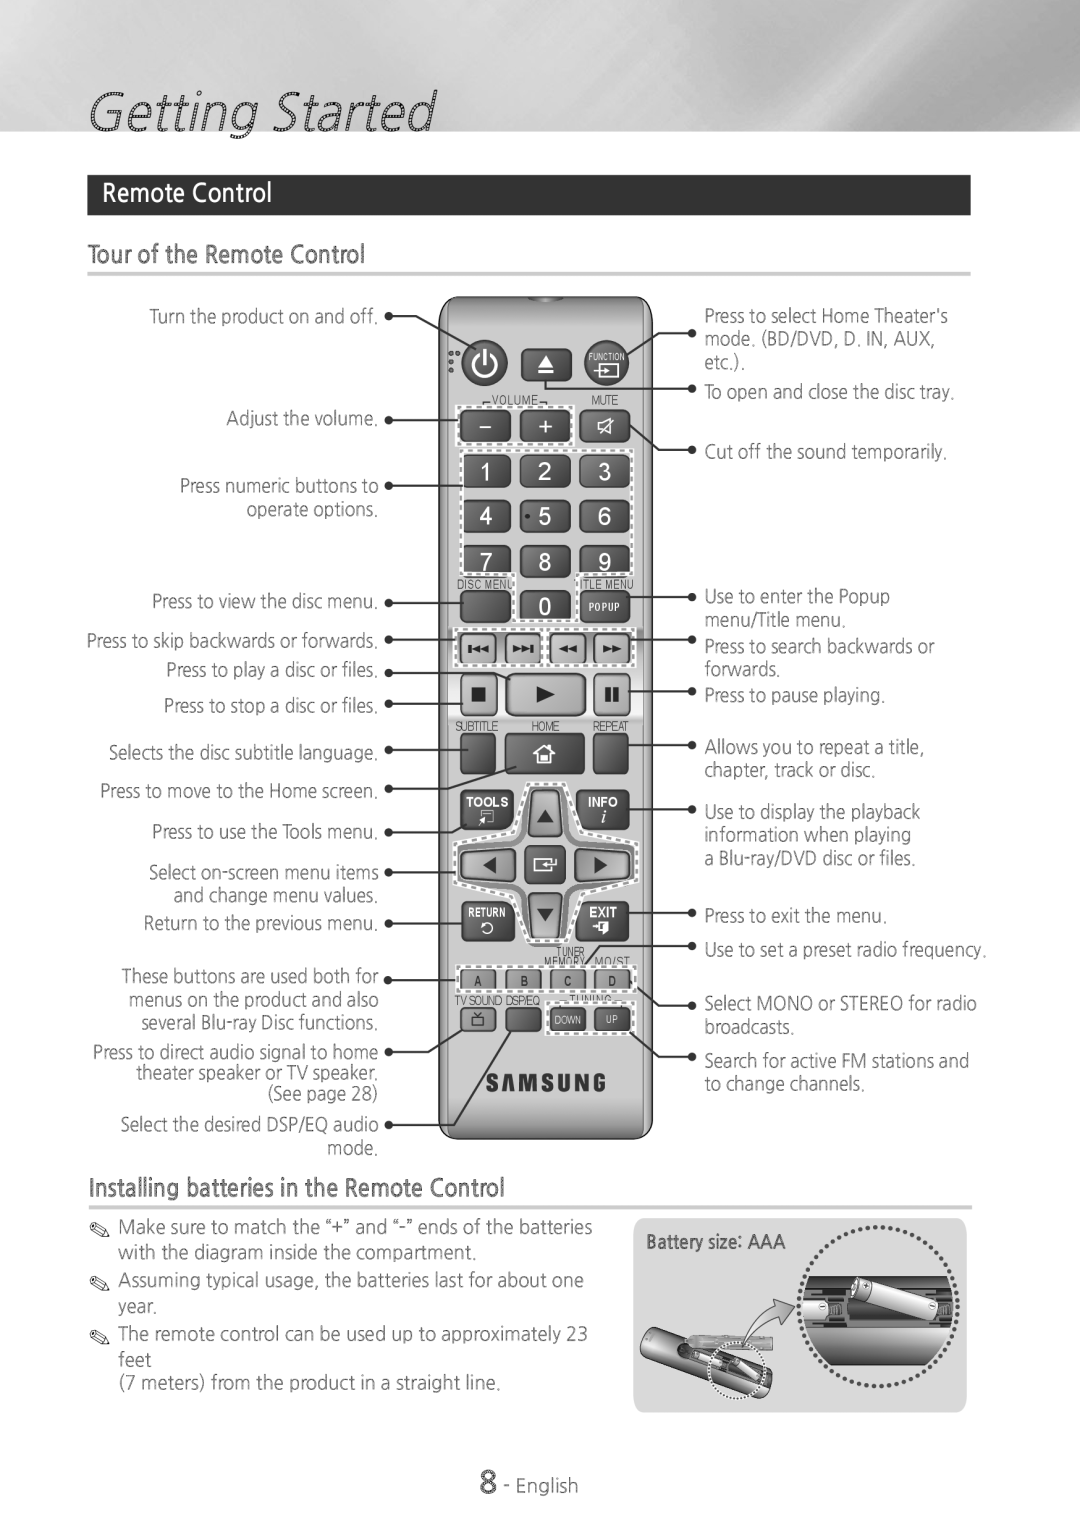 Samsung HT-H4500 user manual Tour of the Remote Control, Installing batteries in the Remote Control, Getting Started 